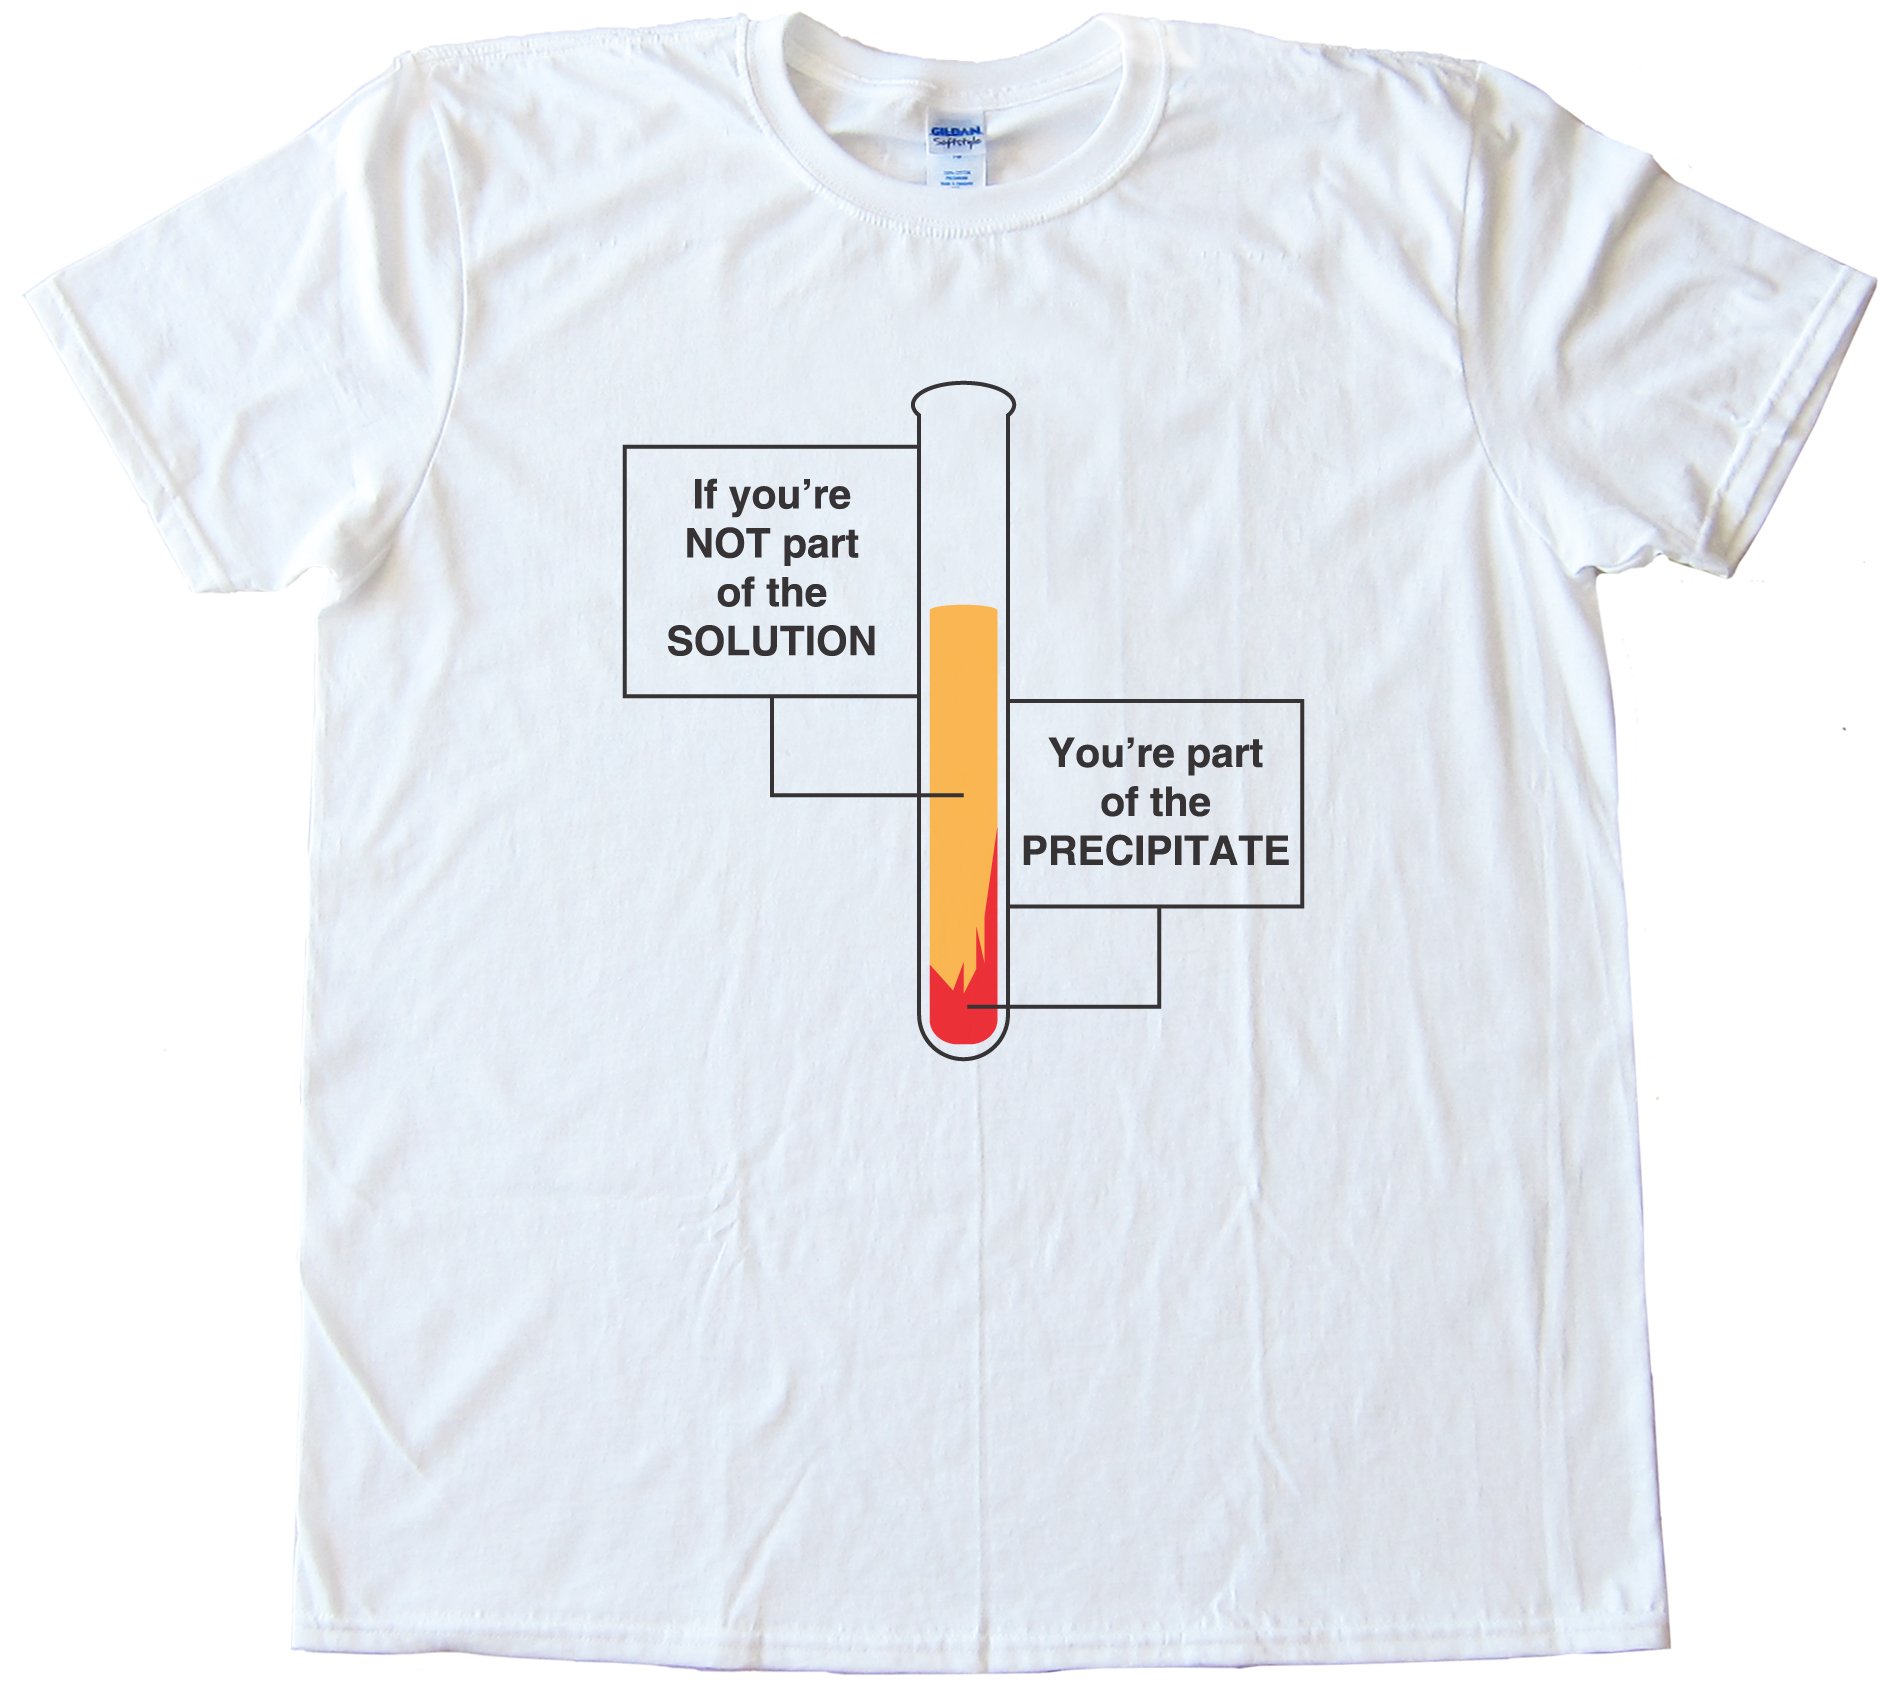 If You'Re Not Part Of The Solution - You'Re Part Of The Precipitate Tee Shirt